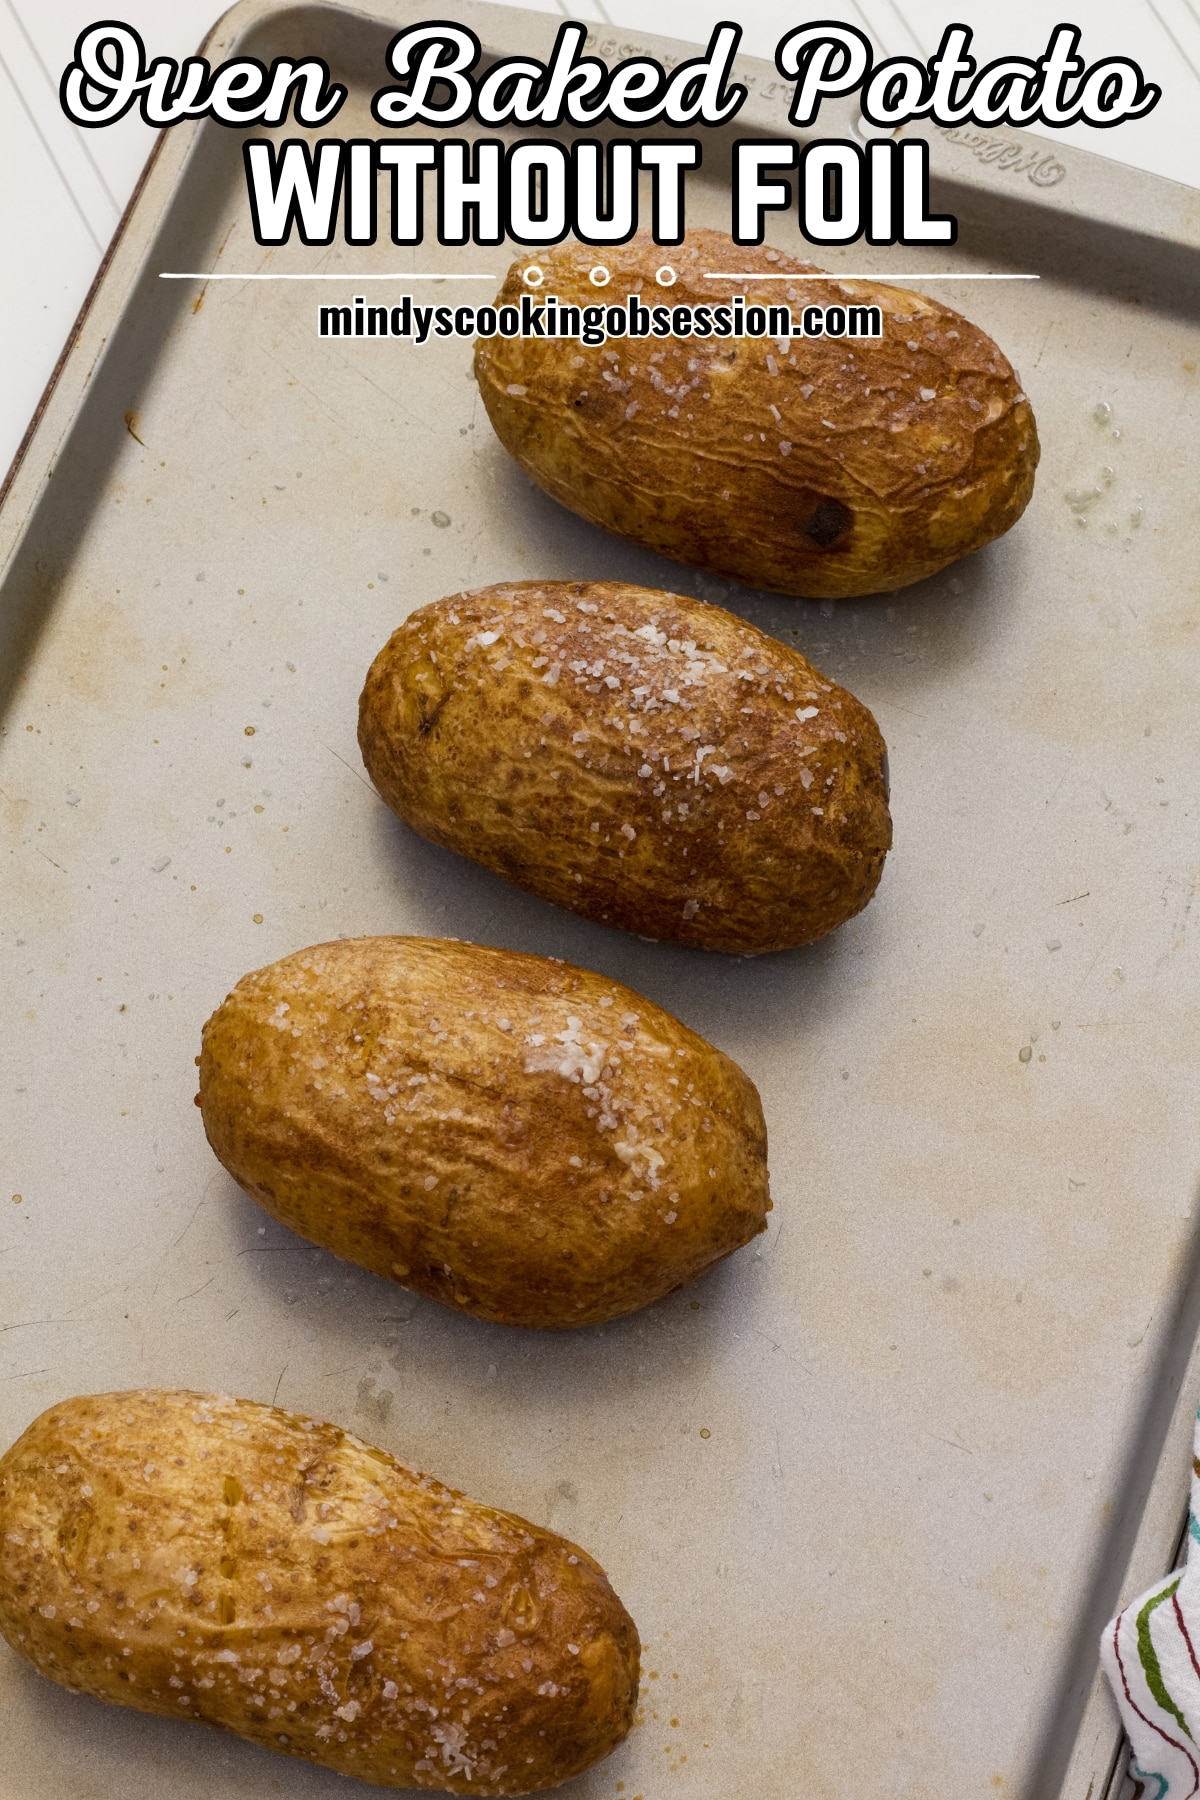 https://www.mindyscookingobsession.com/wp-content/uploads/2023/10/How-to-Make-Perfect-Baked-Potato-in-Oven-with-No-Foil-1.jpg